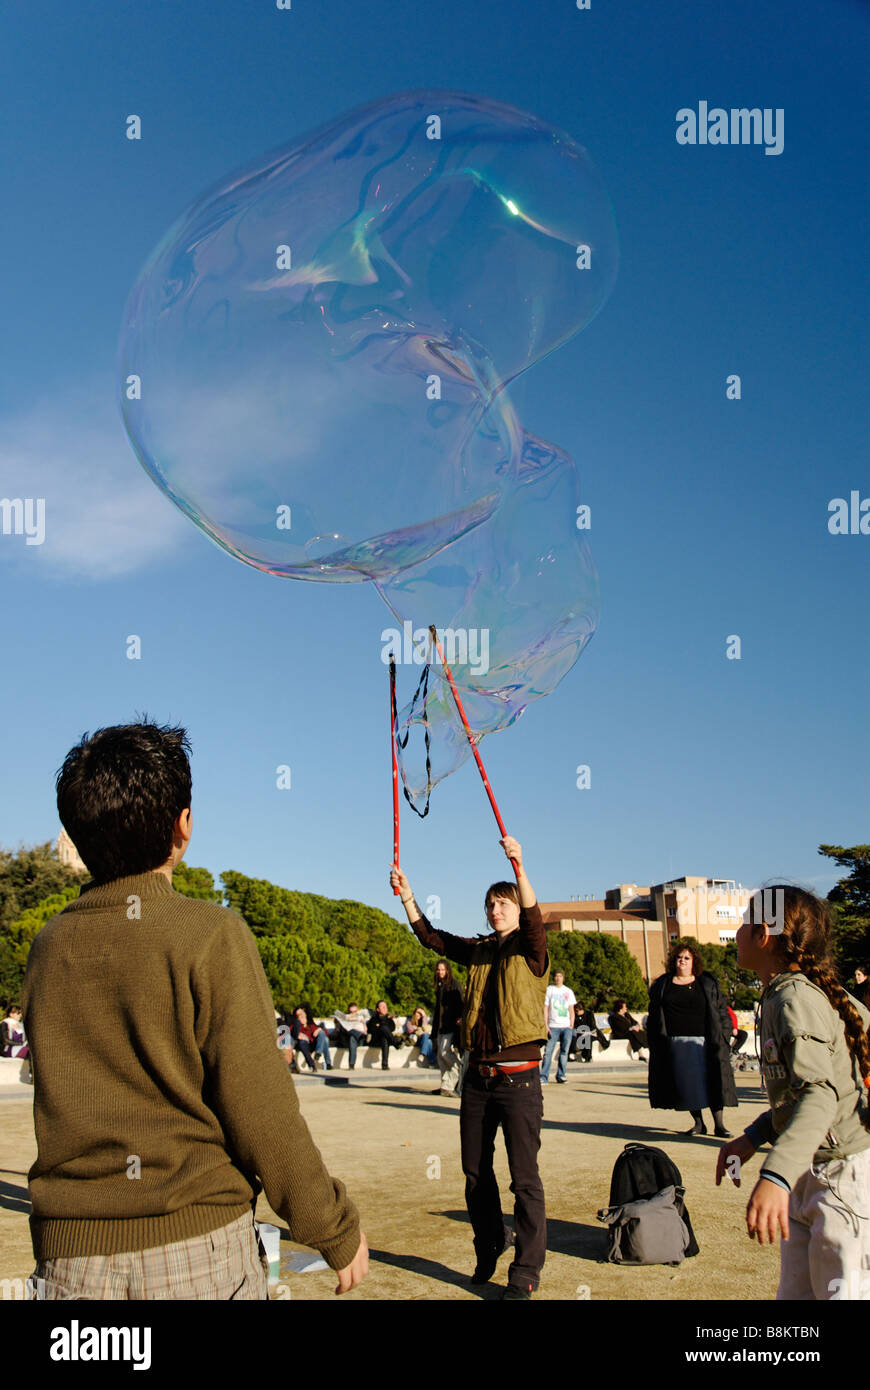 Performing street artist blowing giant bubbles in Park Güell designed by Catalan artist Antoni Gaudí Barcelona Spain Stock Photo